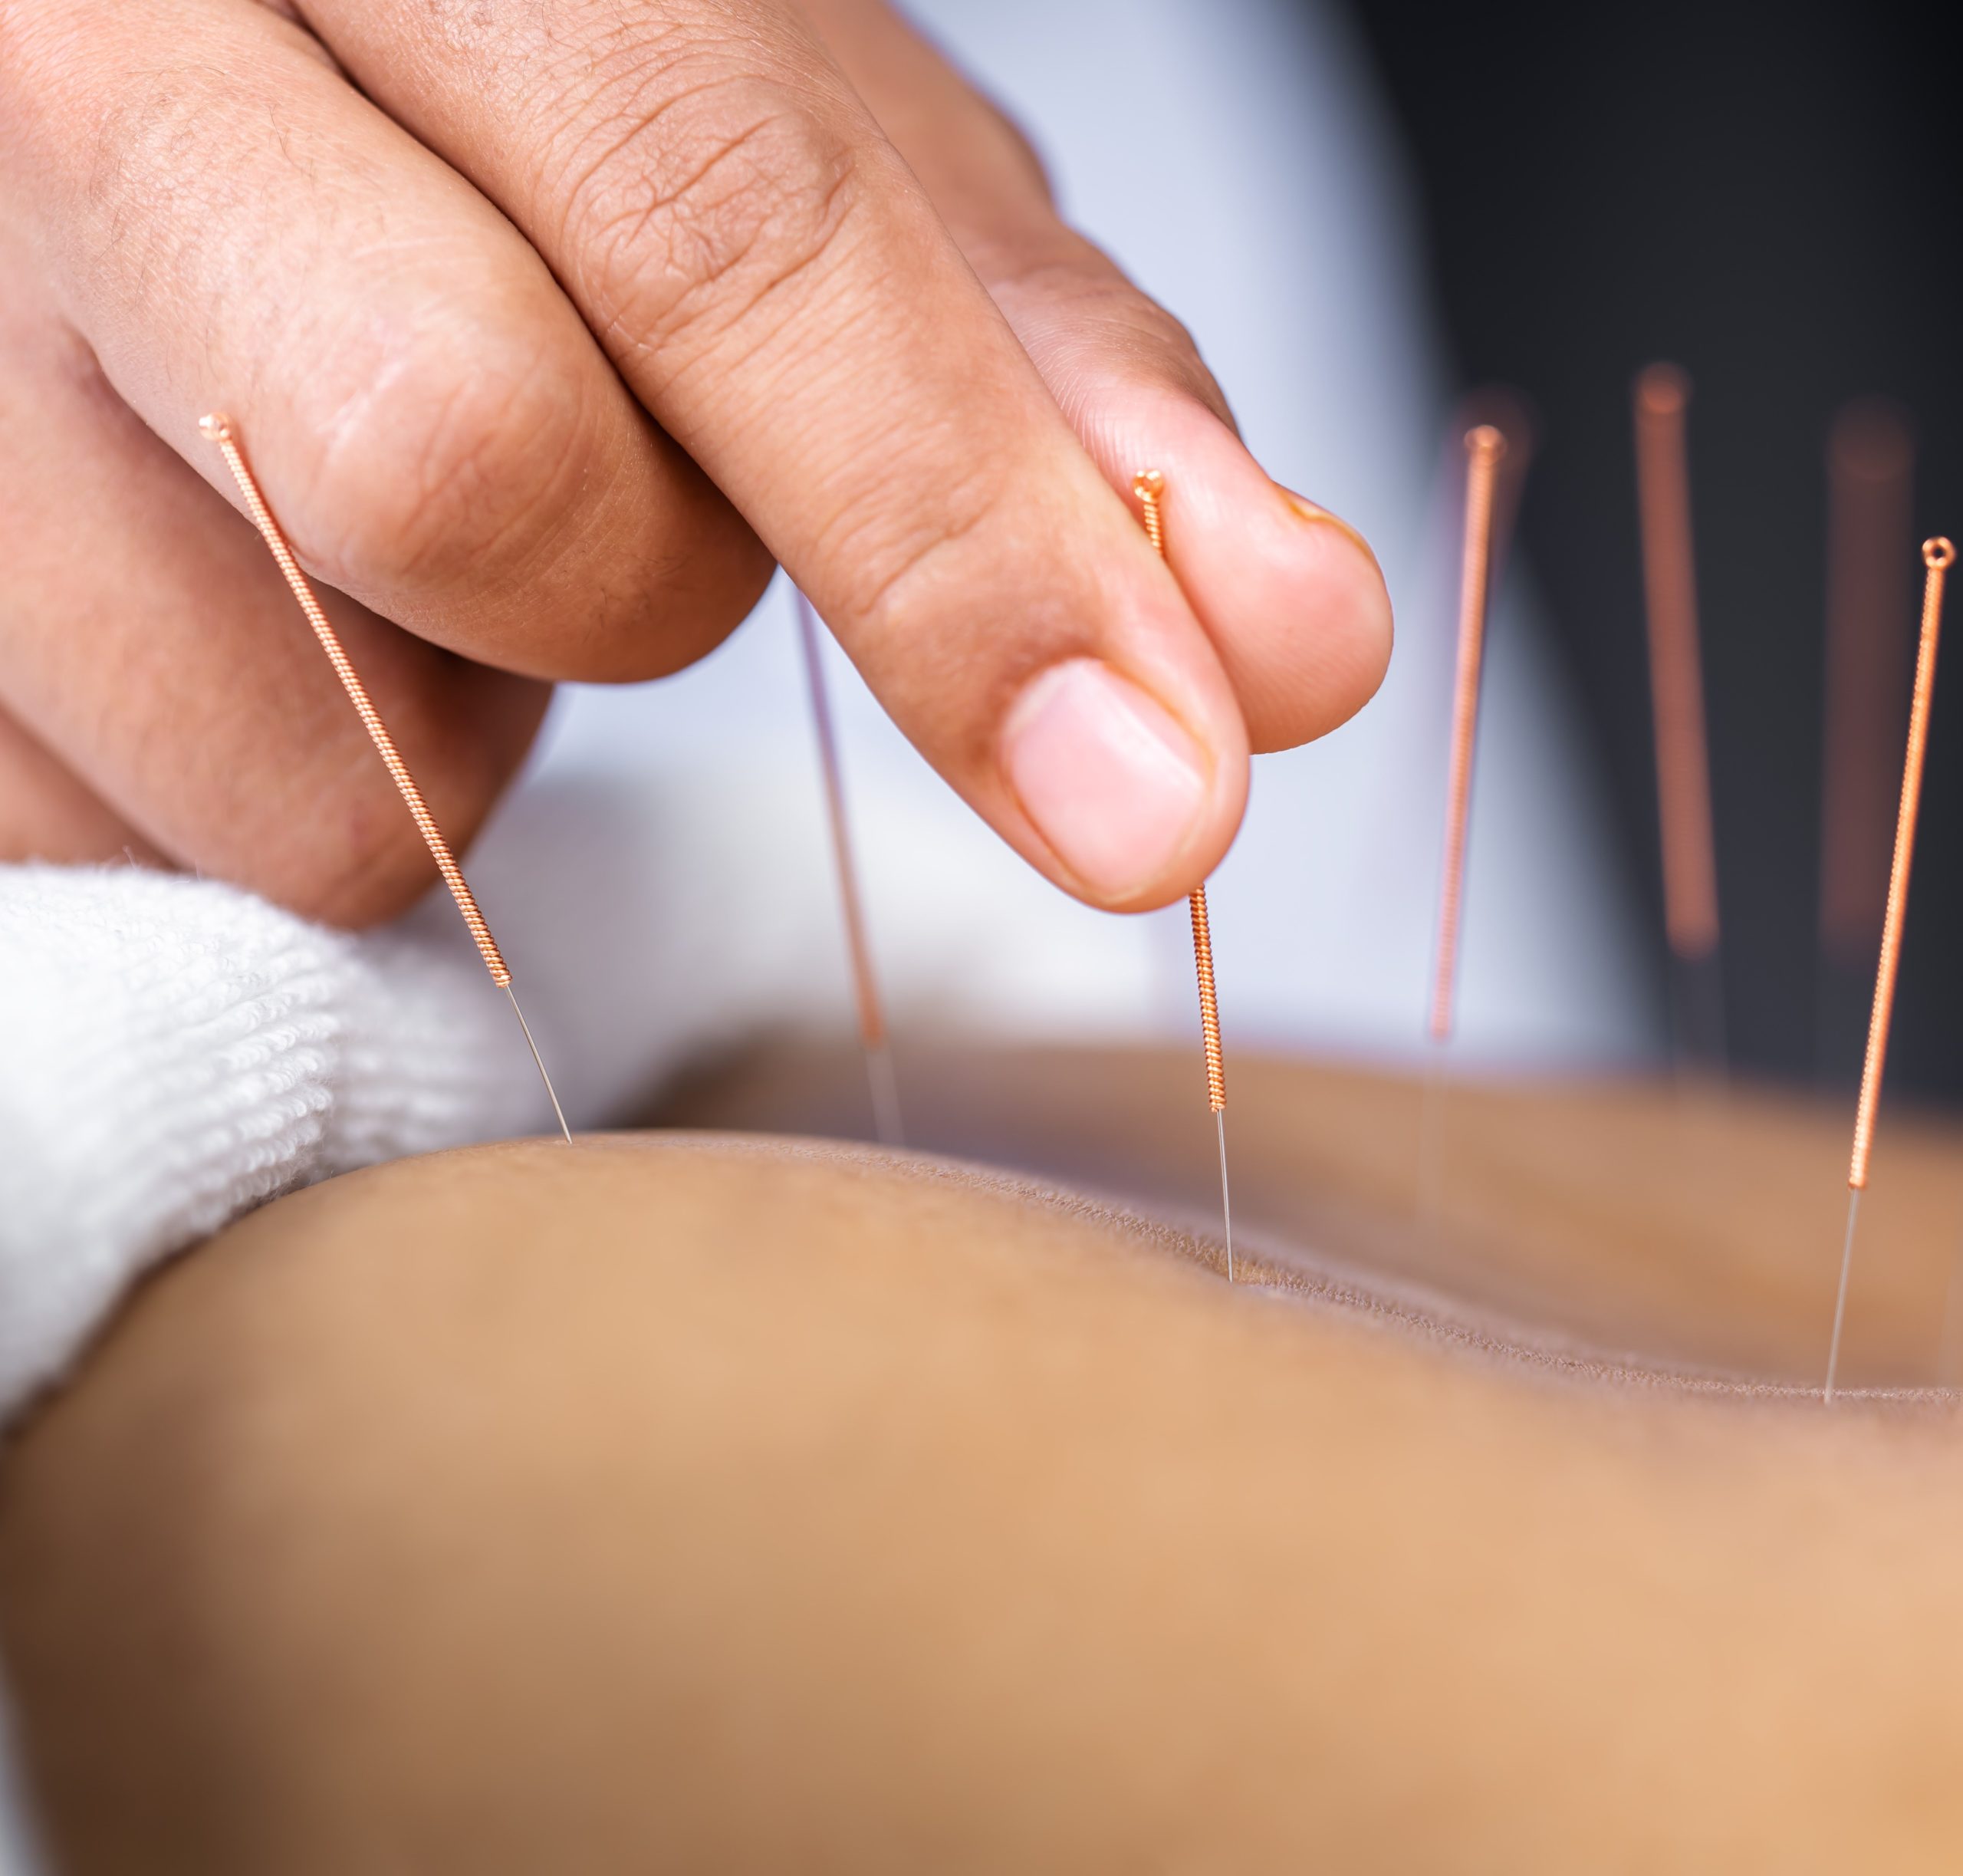 acupuncture being performed on a person